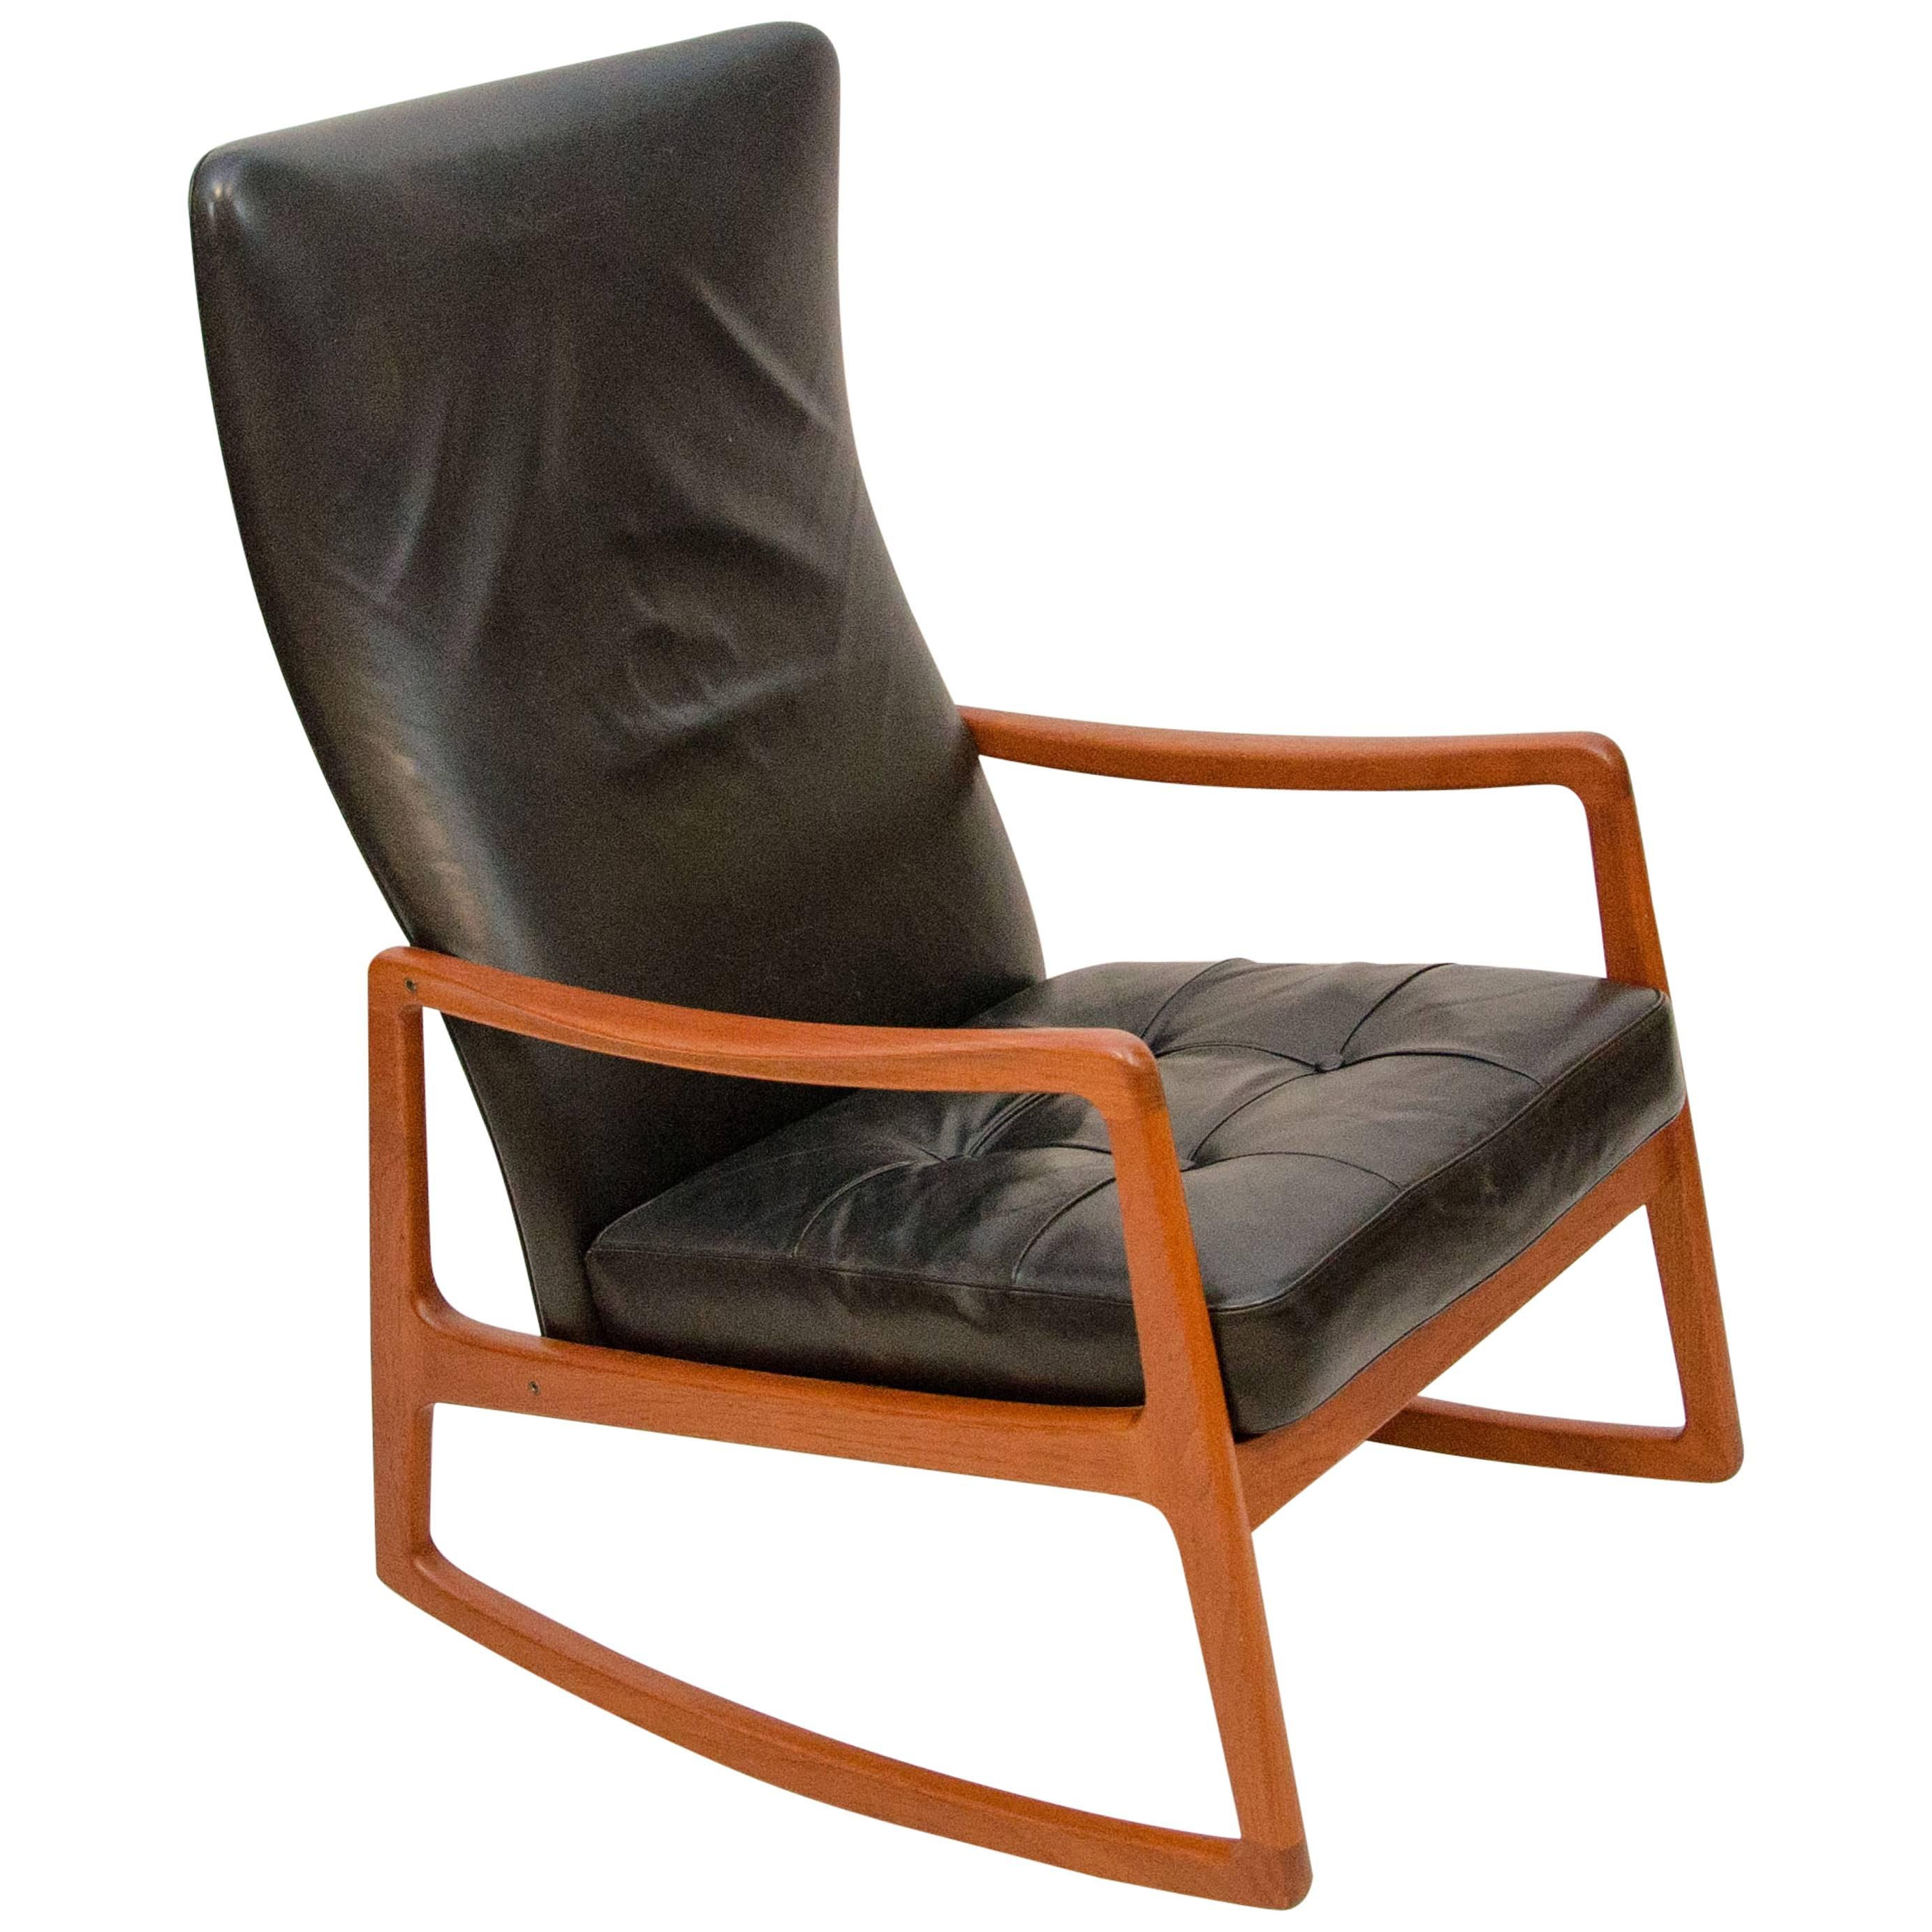 Danish Teak and Leather High Back Rocking Chair by Ole Wanscher For Sale